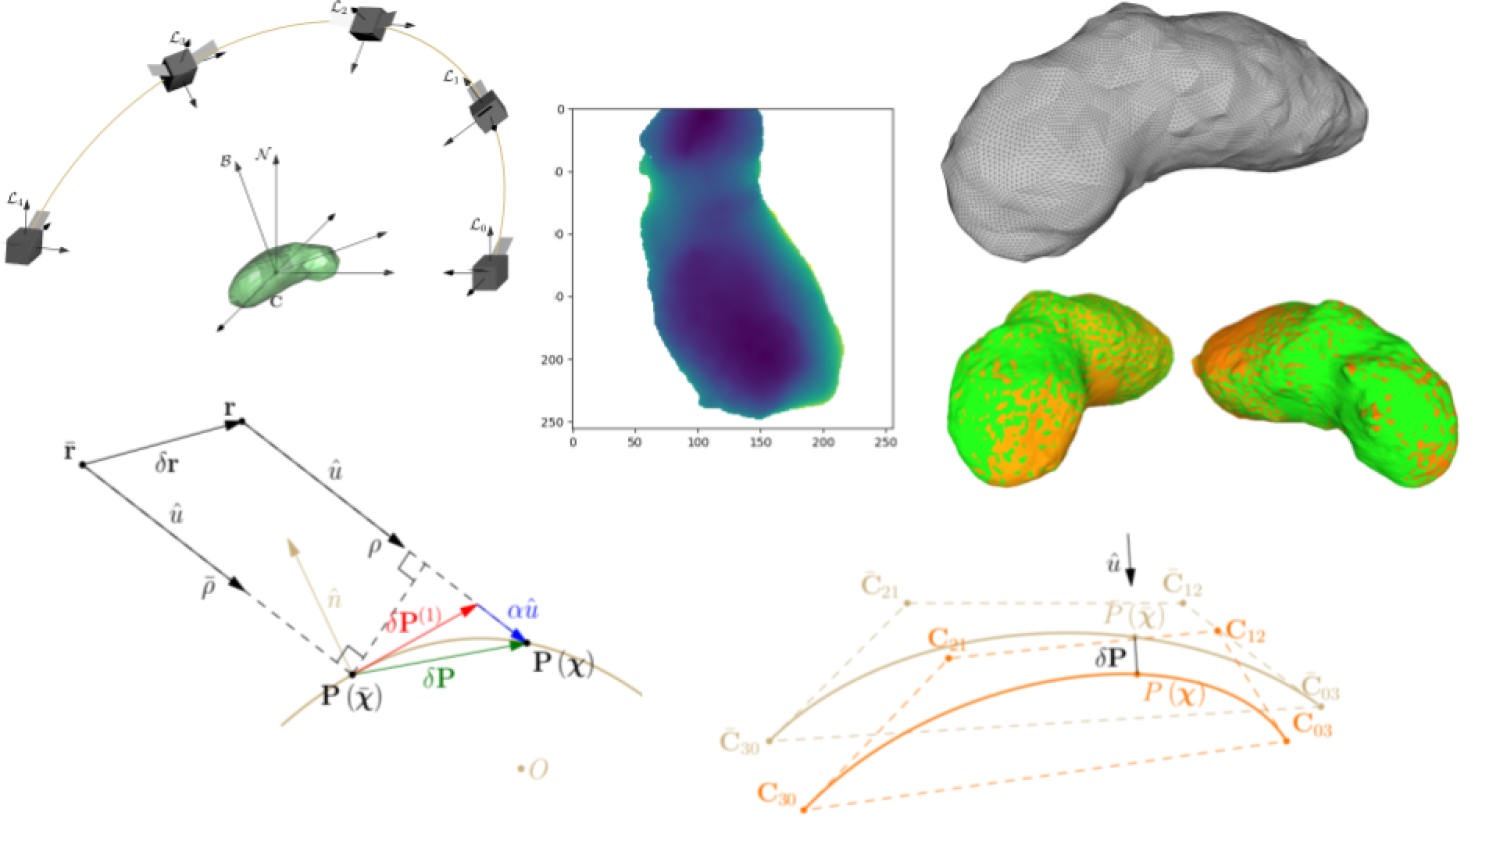 Small Body Shape Reconstruction, Uncertainty Quantification and Navigation Using Lidar Data (courtesy of Benjamin Bercovici)